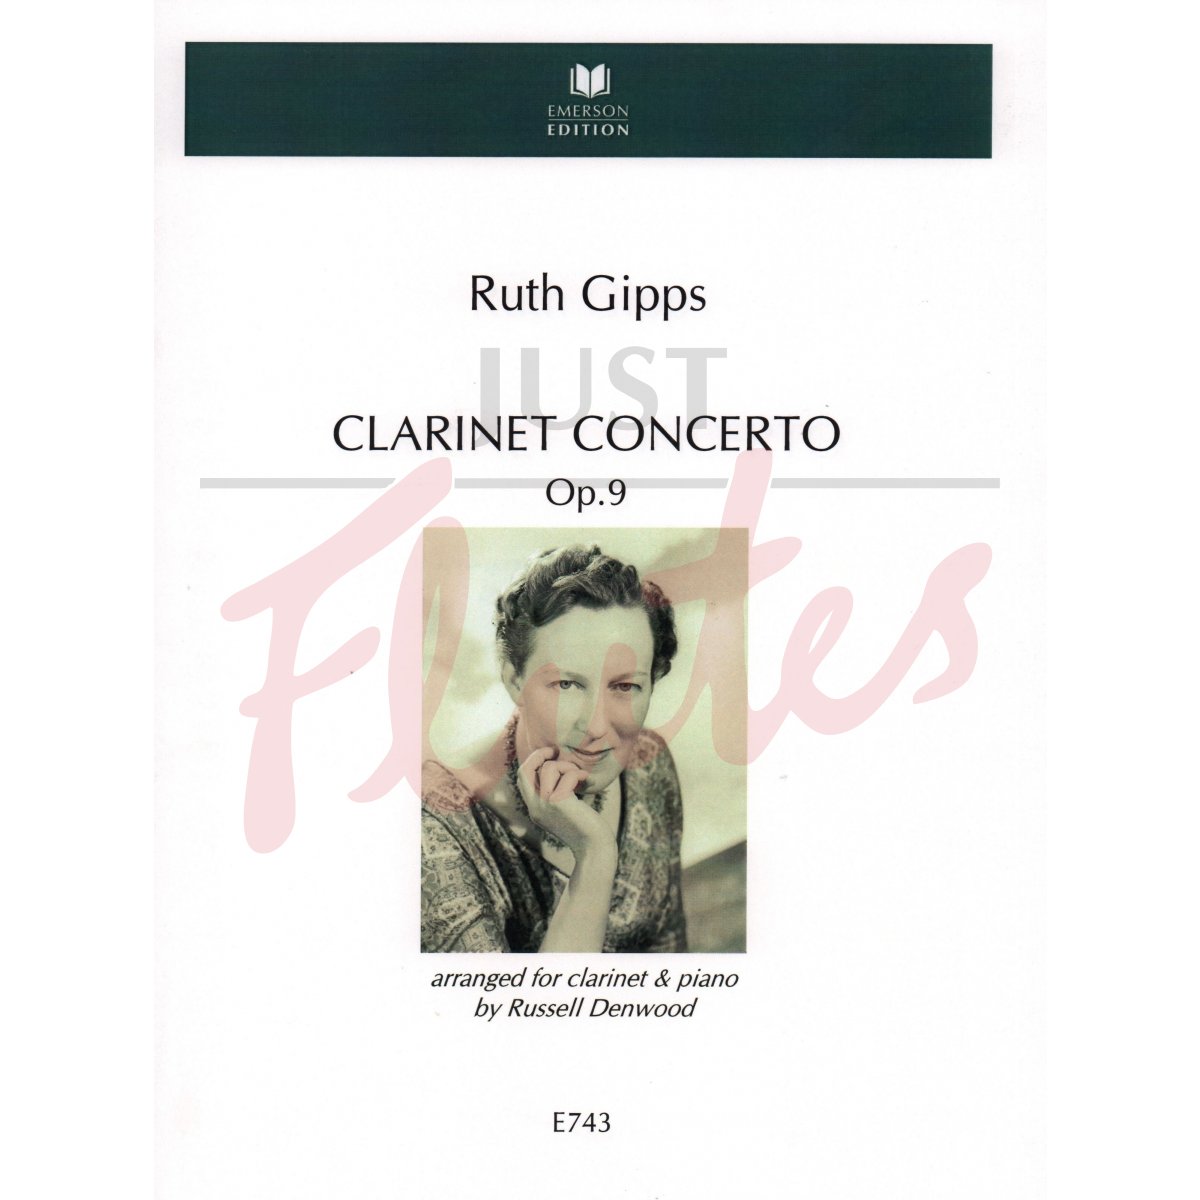 Clarinet Concerto for Clarinet and Piano